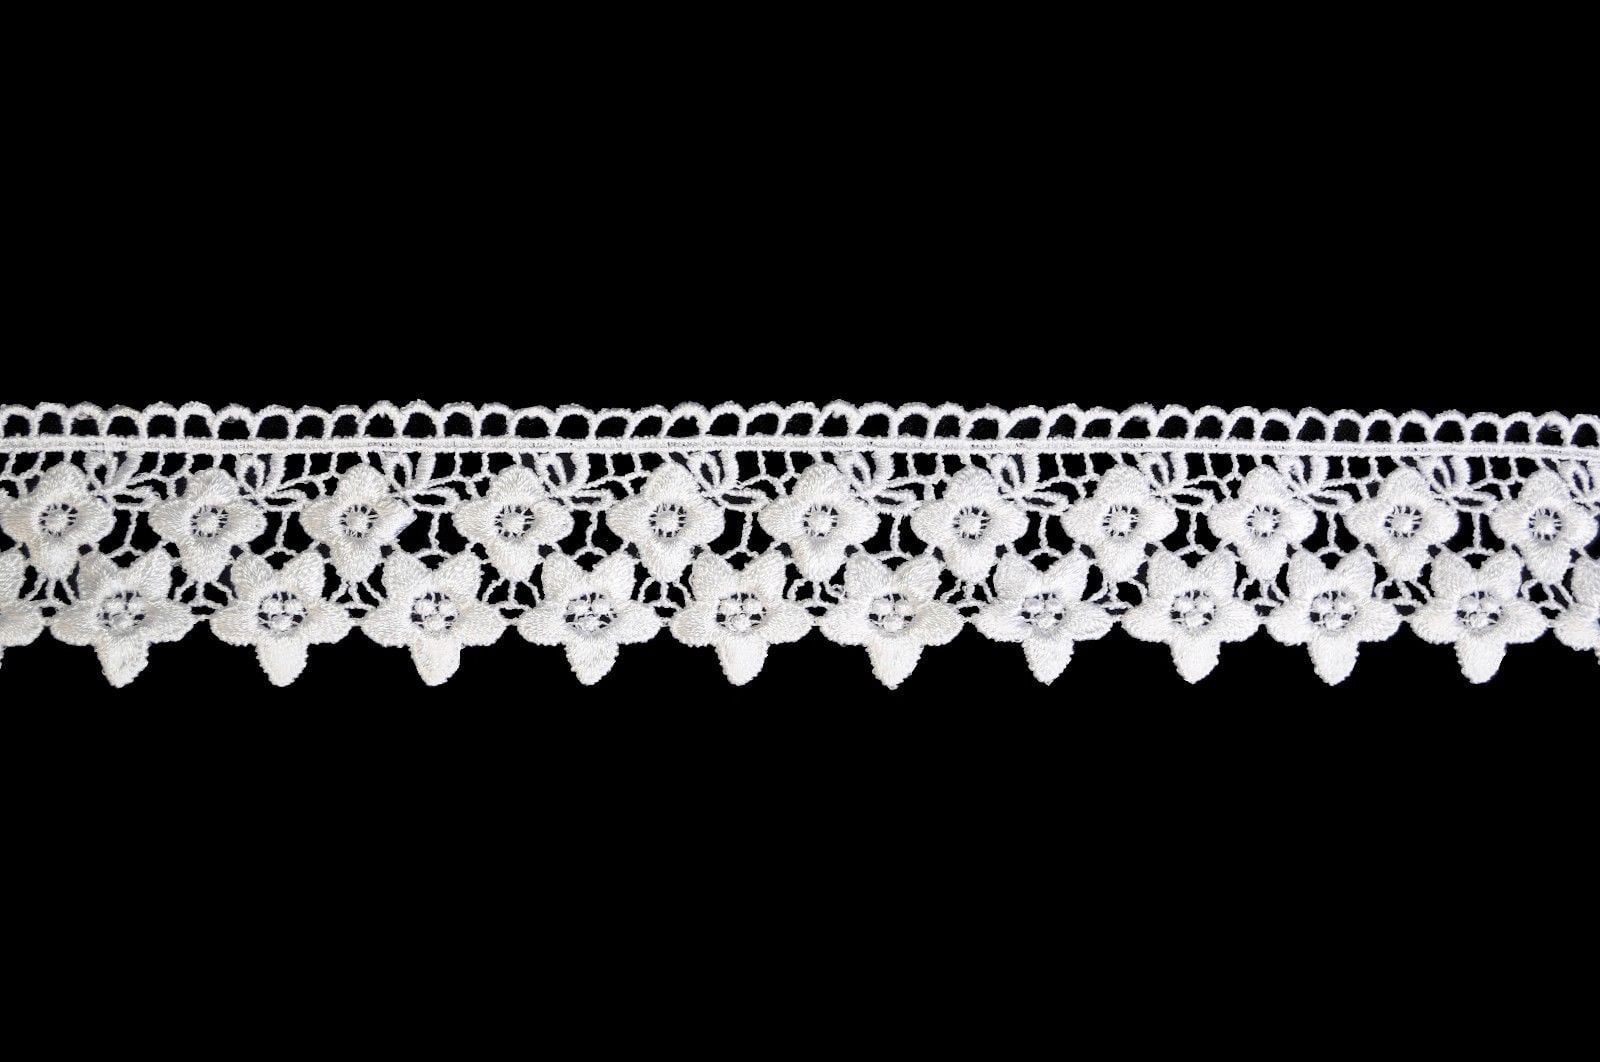 Lily 1" White Ruffled Gathered Raschel Lace Trim Sewing Notion DIY Wholesale Lot